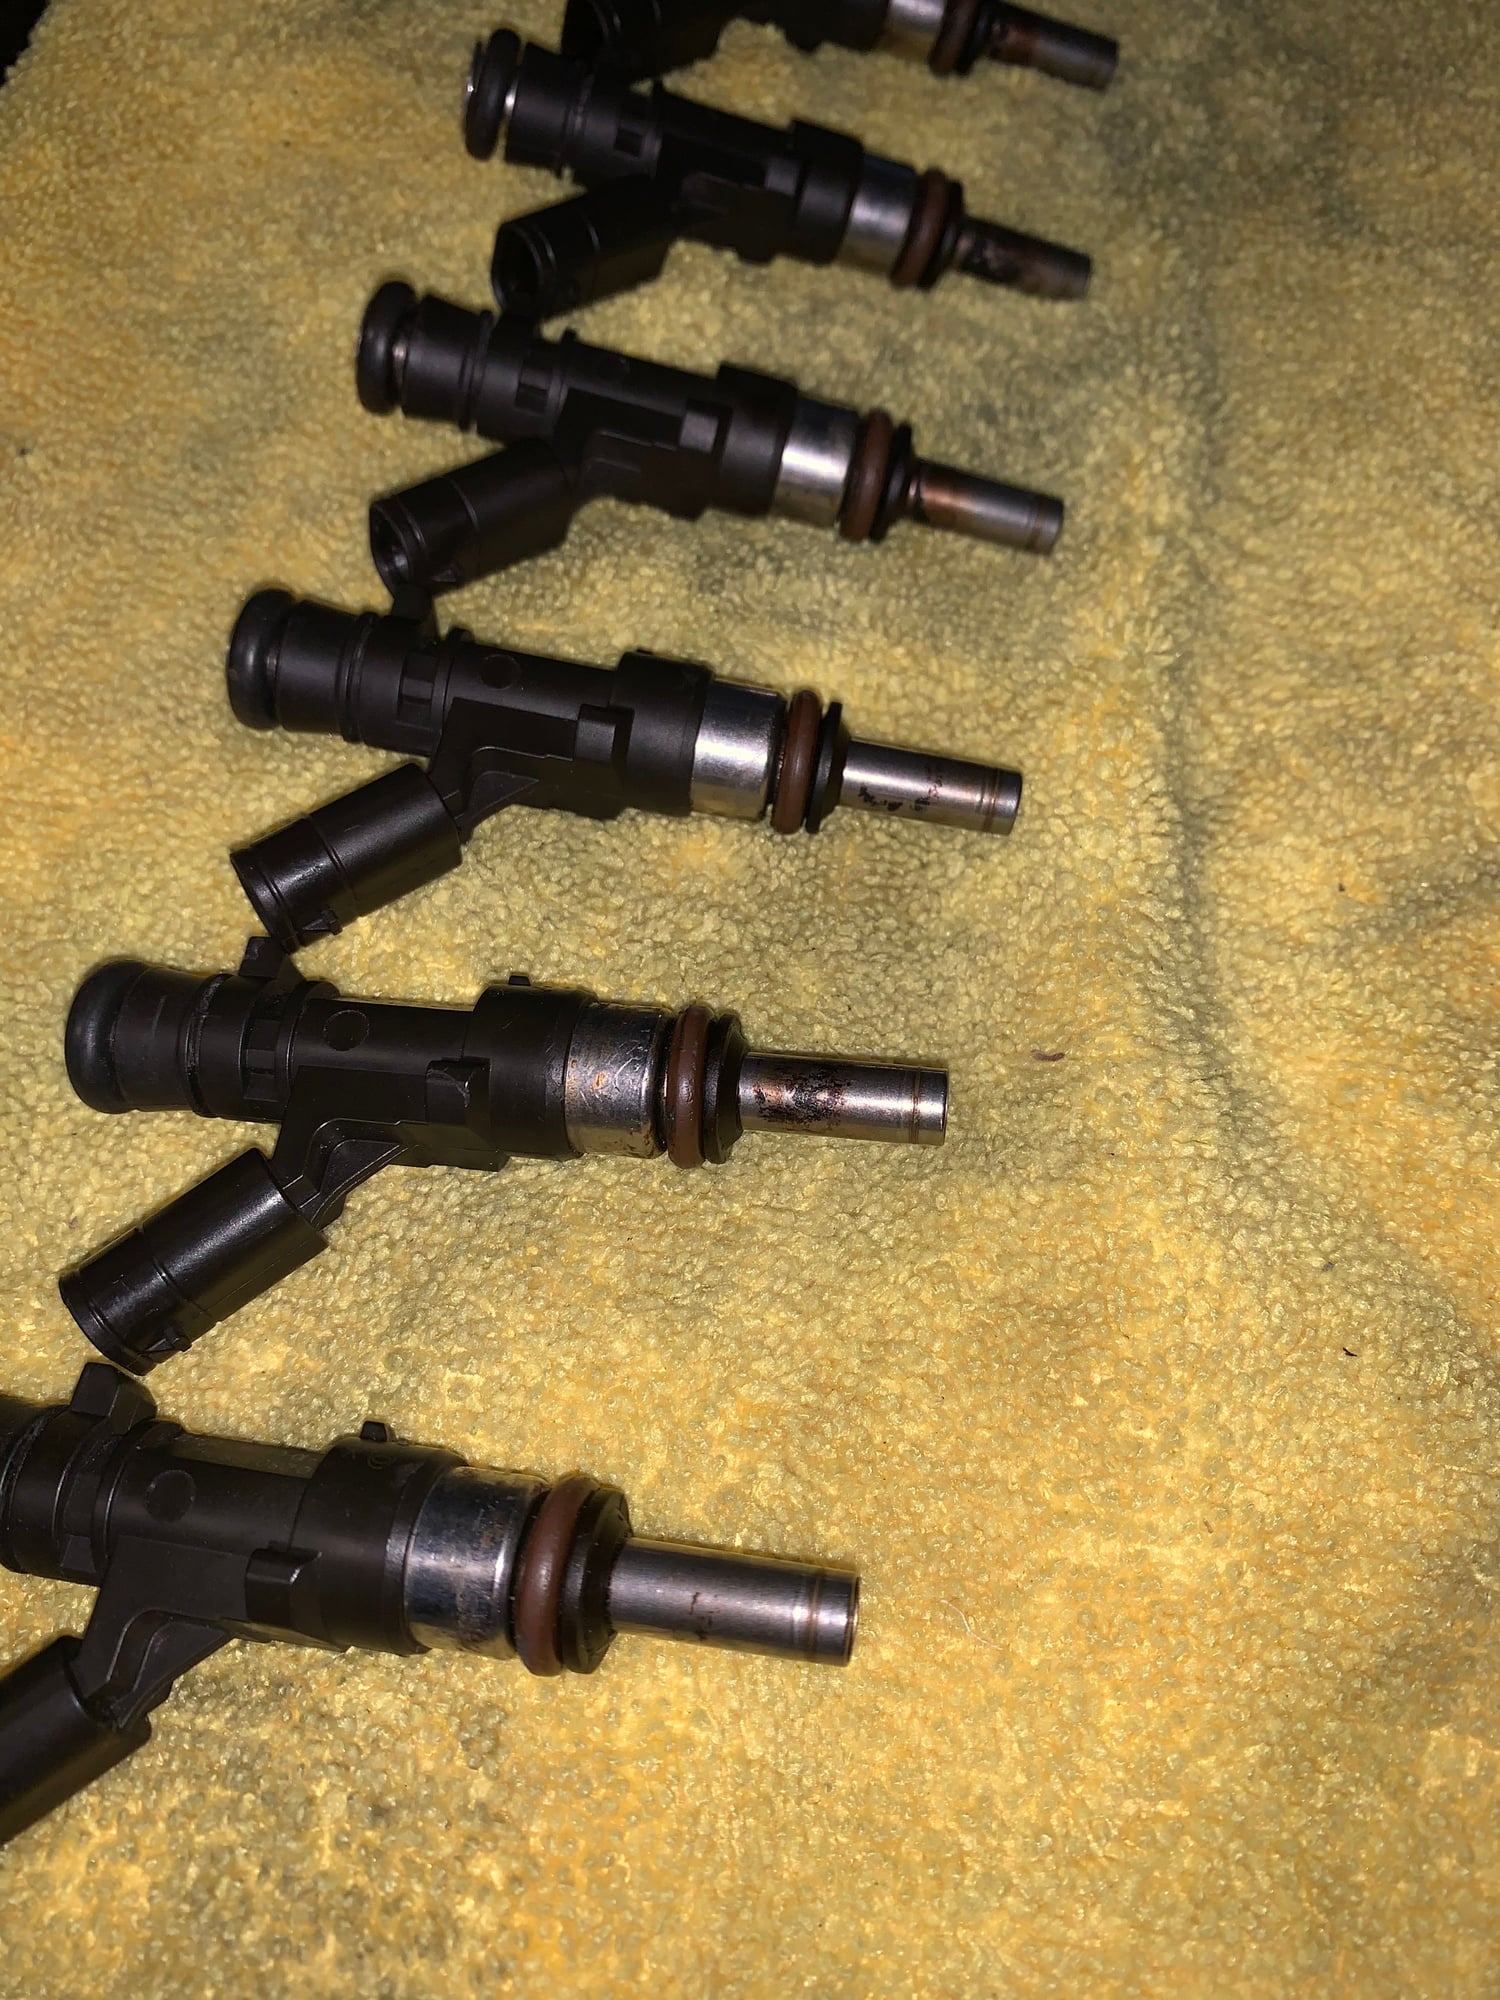 Engine - Intake/Fuel - Used Mercedes Fuel Injectors - Bosch - Used - 2007 to 2009 Mercedes-Benz E63 AMG - Westchester, NY 10710, United States